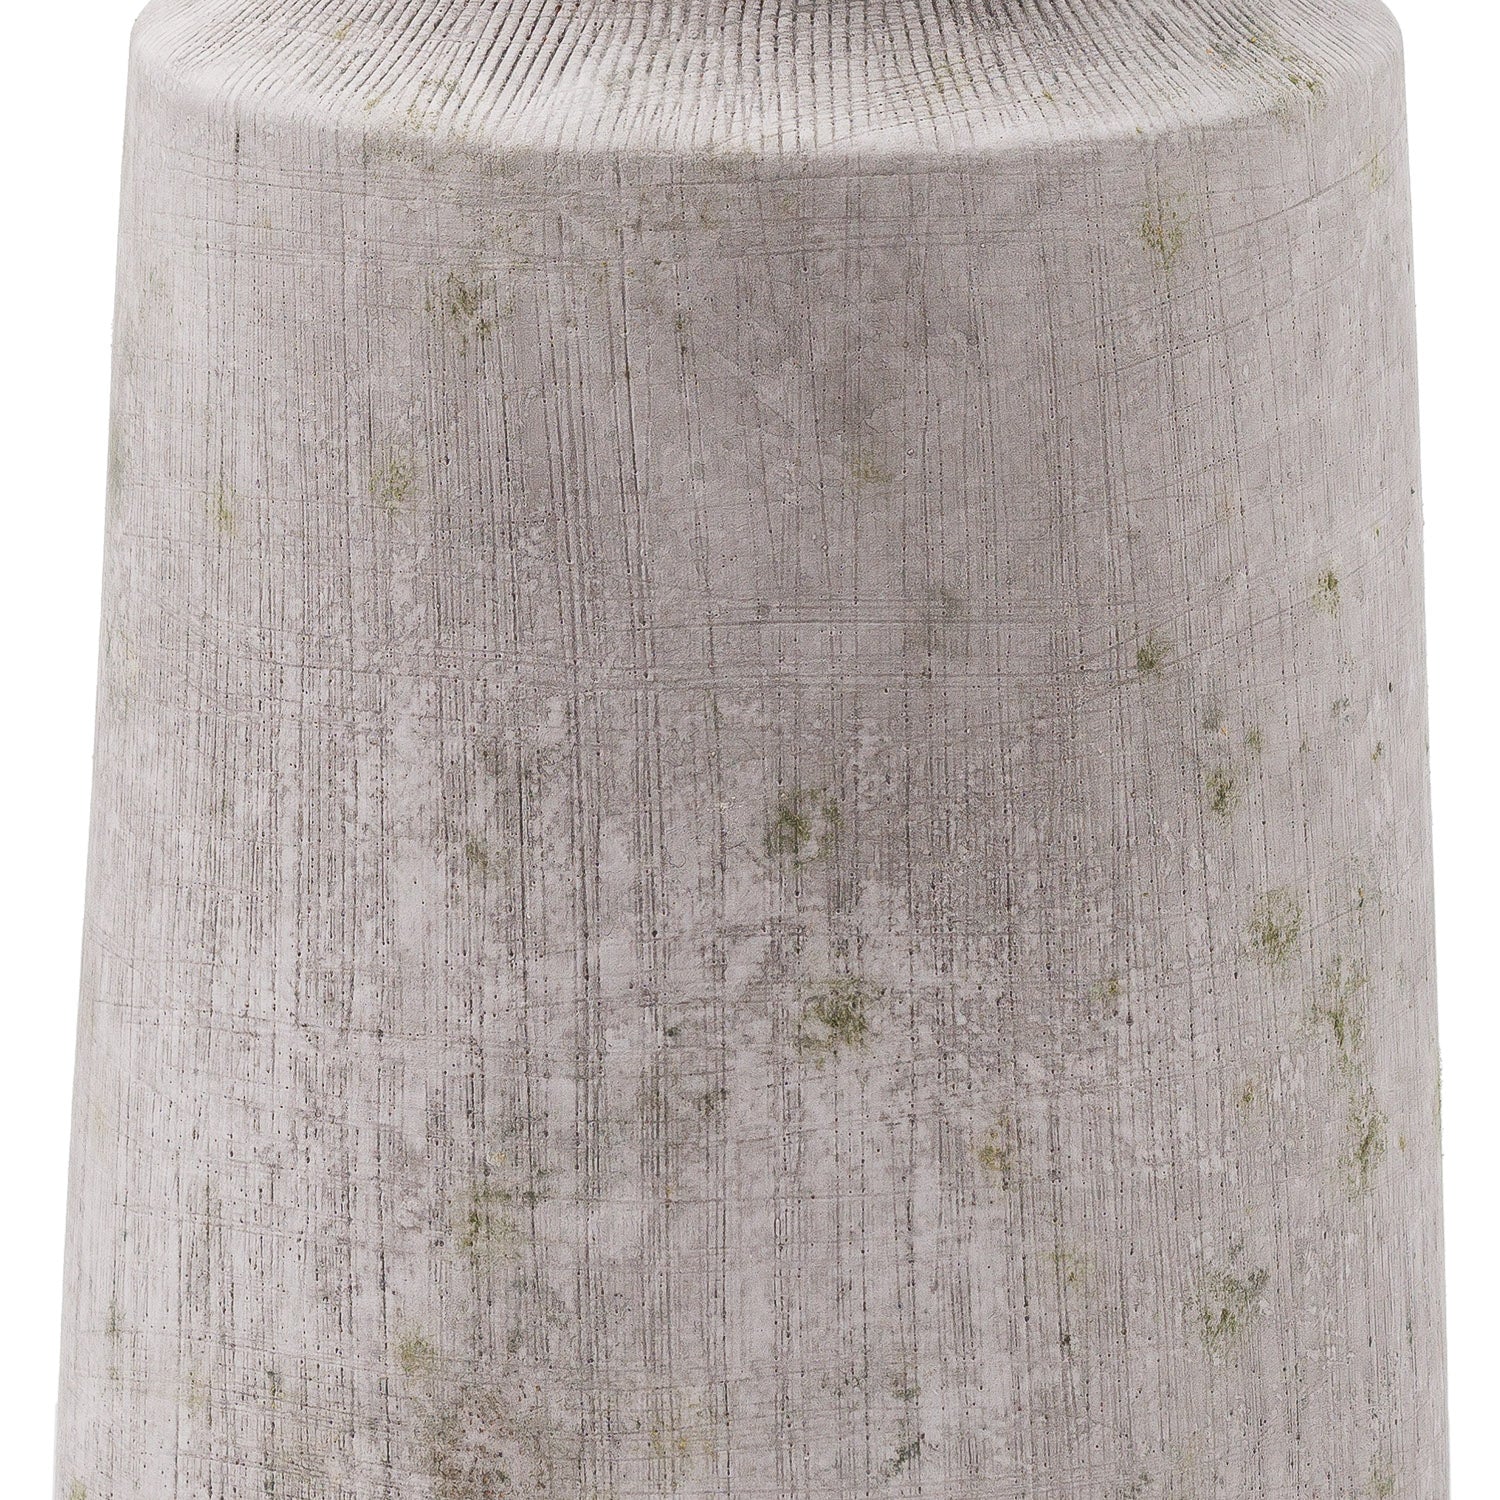 Matt Grey Ceramic Tapered Bottle Vase With Earthy Distressed Texture – Click Style